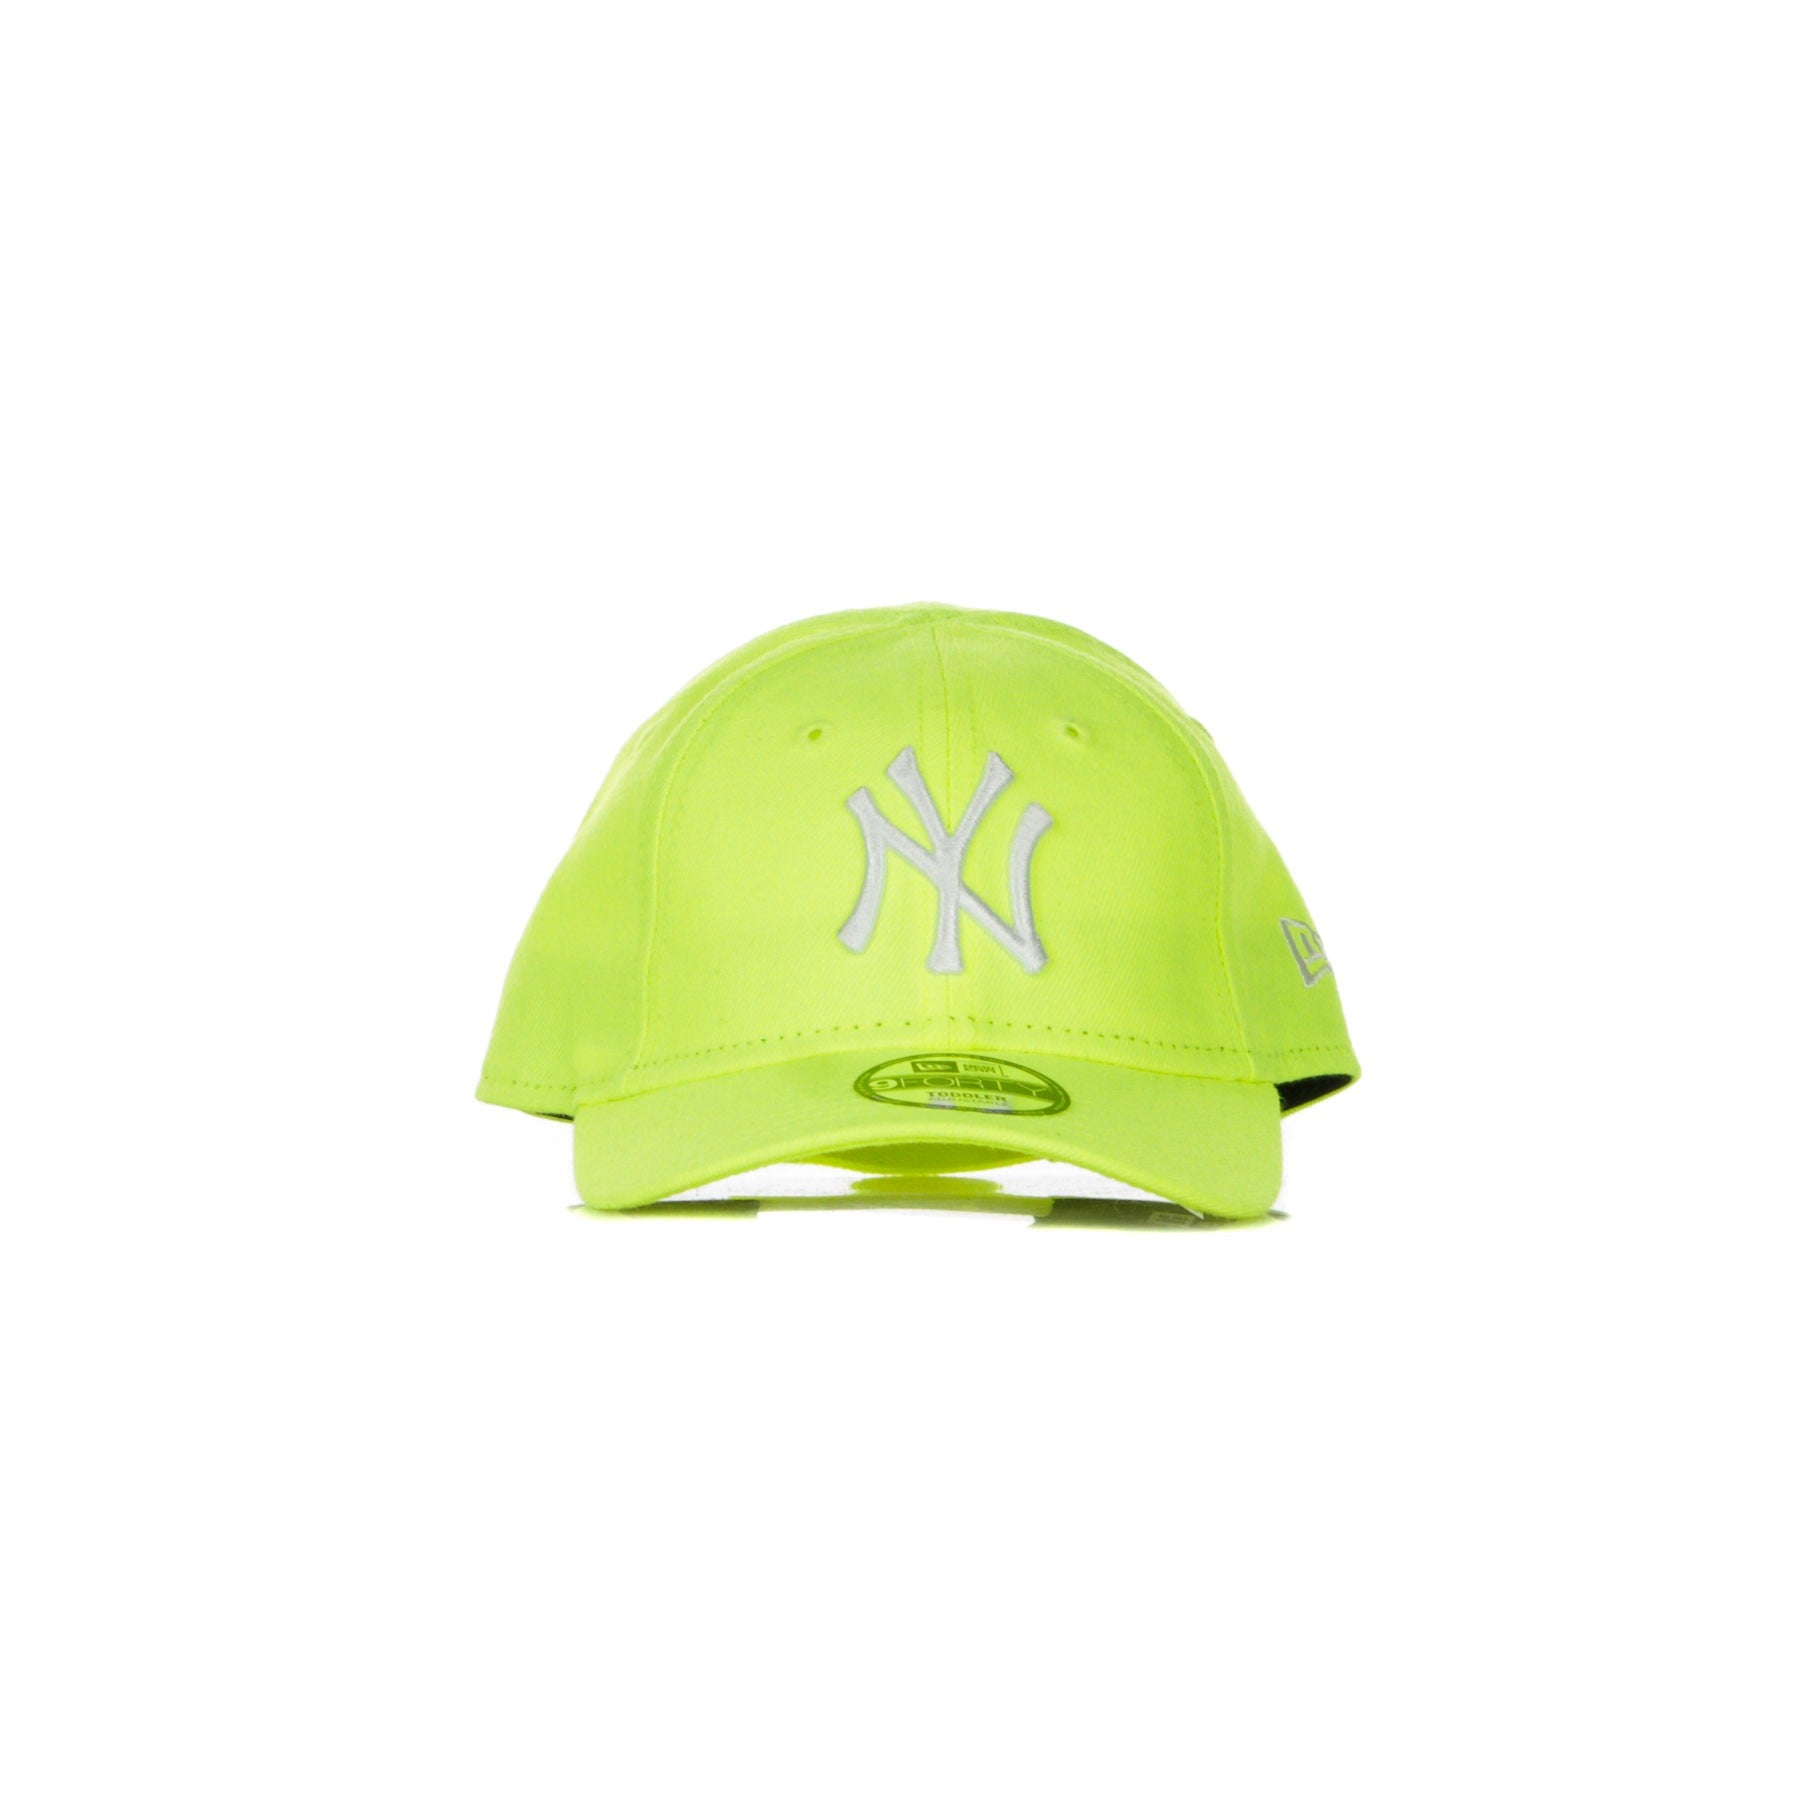 Curved Visor Cap for Children Mlb Kids League Essential Neon Pack Neyyan Neon Yellow/white